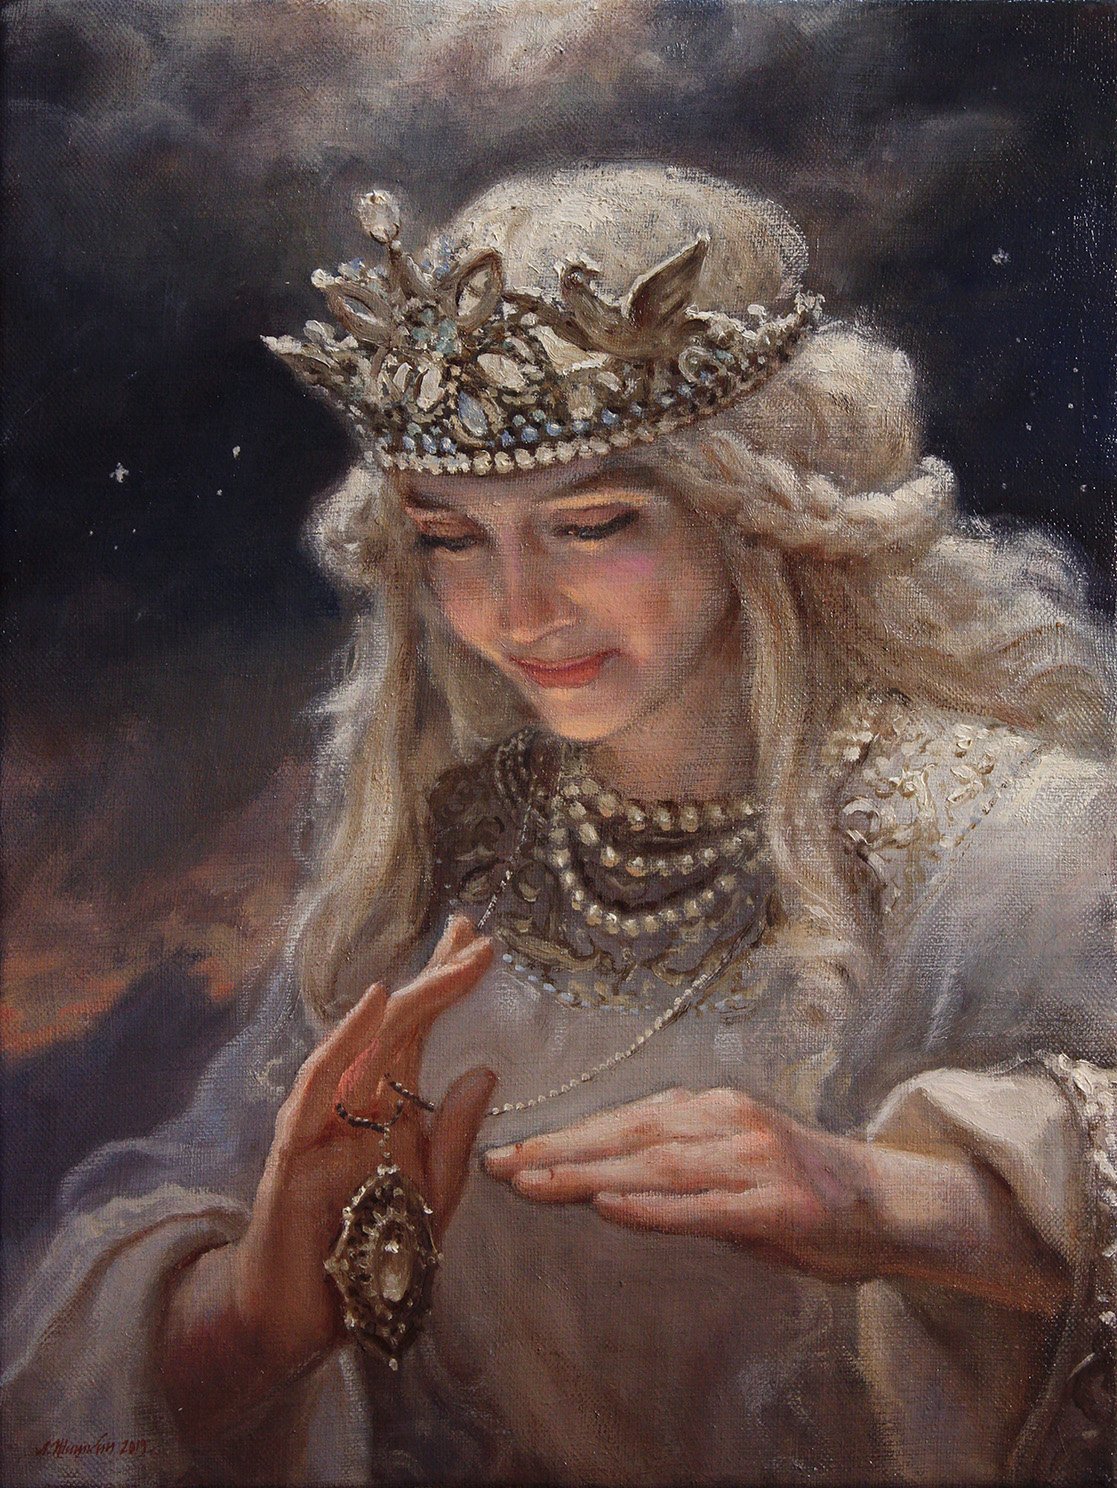 A painting of a blond, long-haired woman wearing an elaborate star-like crown and a white robe.